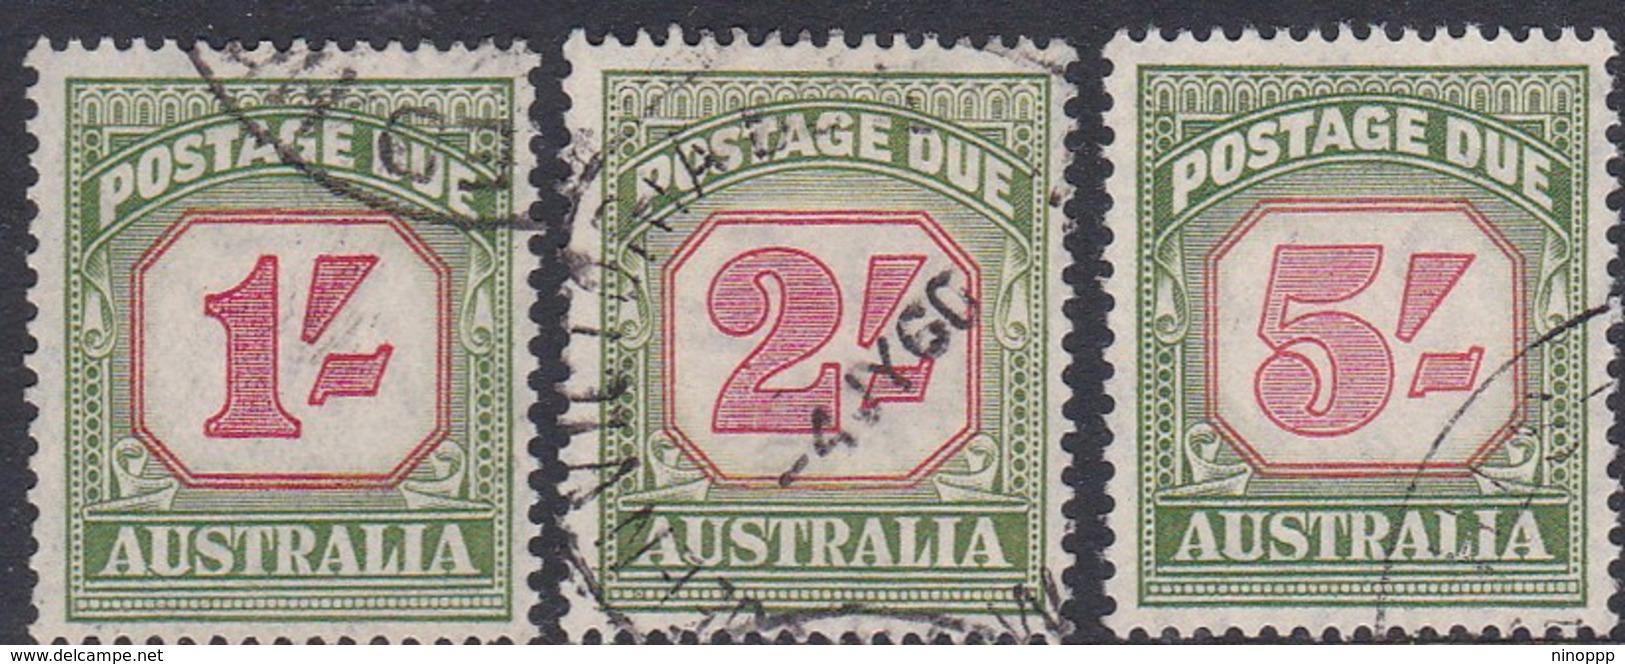 Australia Postage Due Stamps SG D129a-131a 1953 Used Stamps - Segnatasse